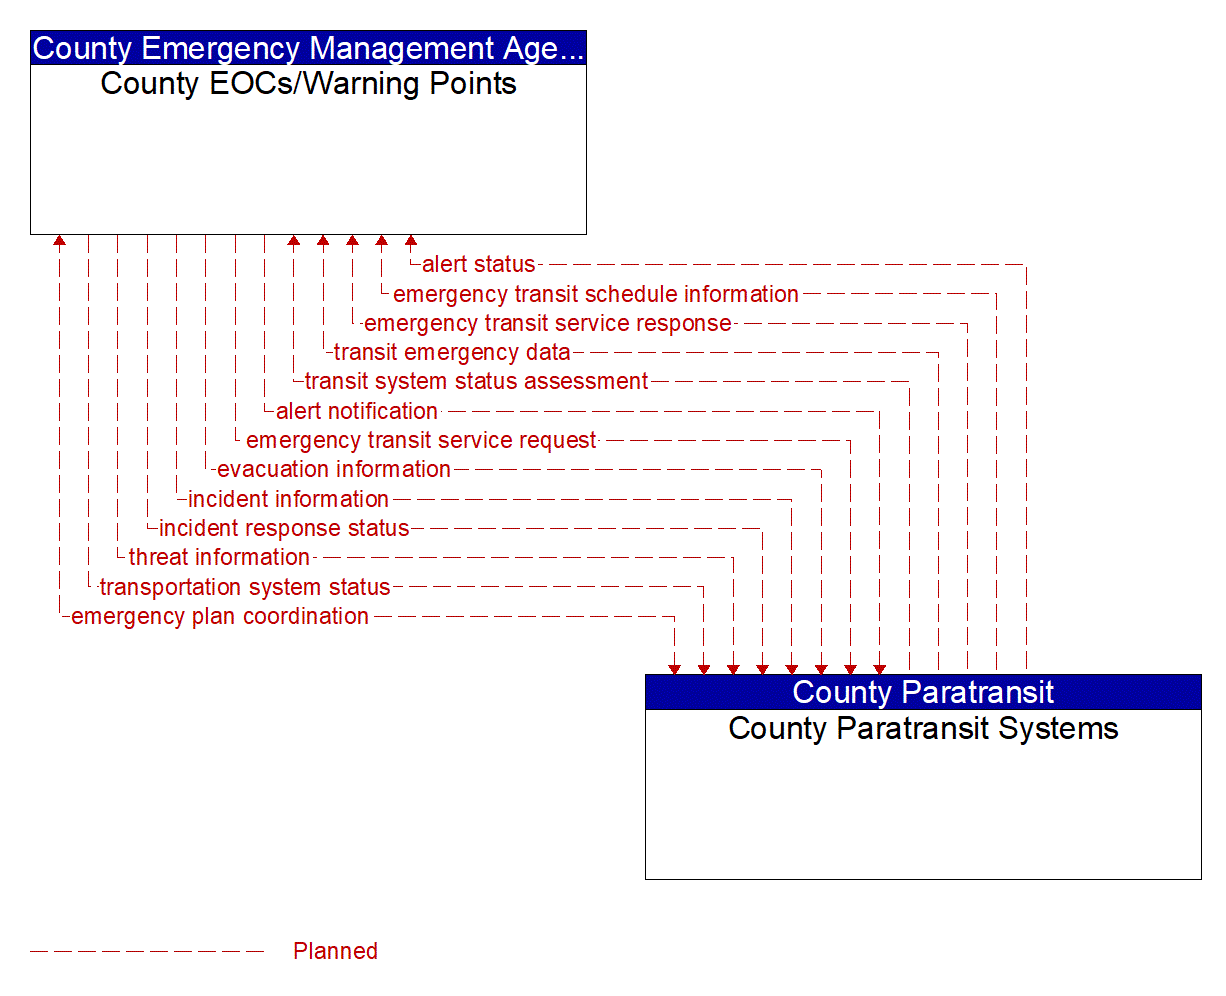 Architecture Flow Diagram: County Paratransit Systems <--> County EOCs/Warning Points